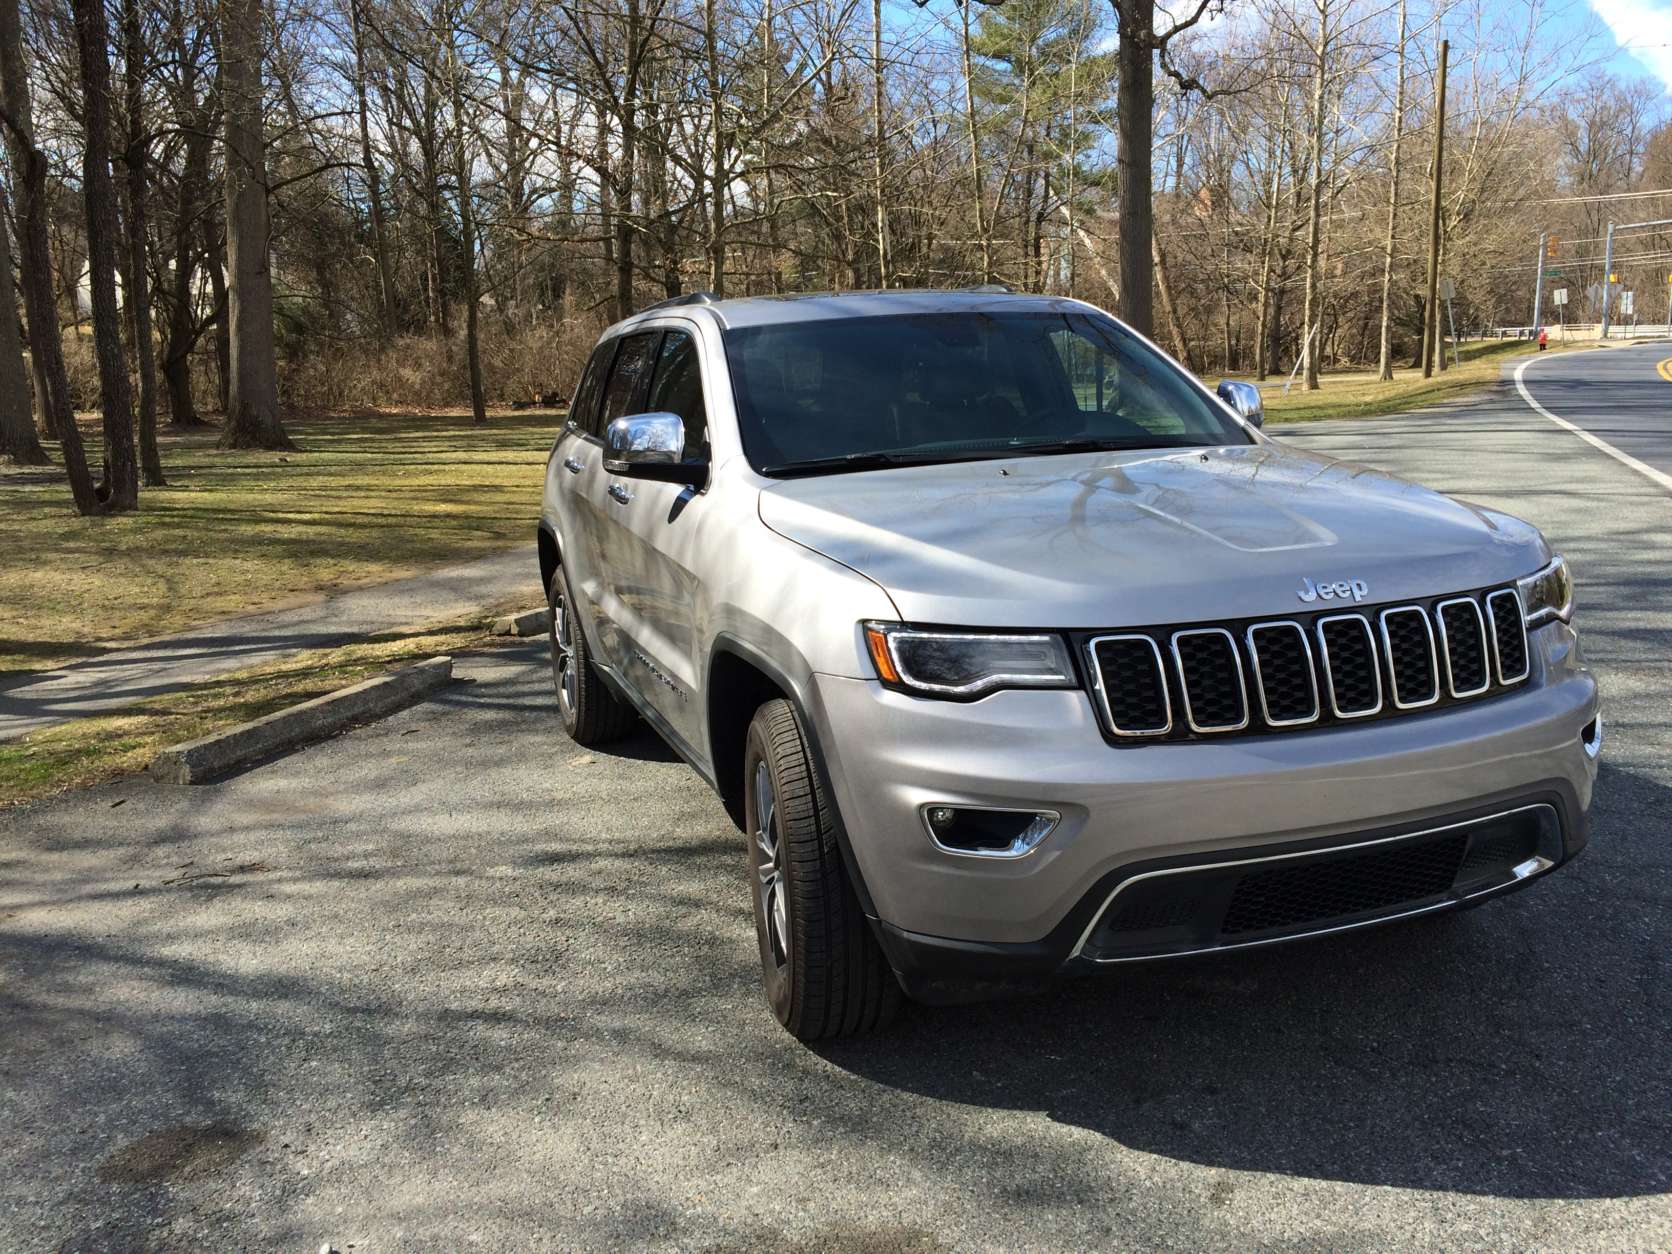 This 2017 Jeep Grand Cherokee tester came with the standard V6, which provides enough power for most drivers. Jeep also offers a large V8 for more power or a turbo diesel option for better fuel economy. (WTOP/Mike Parris)